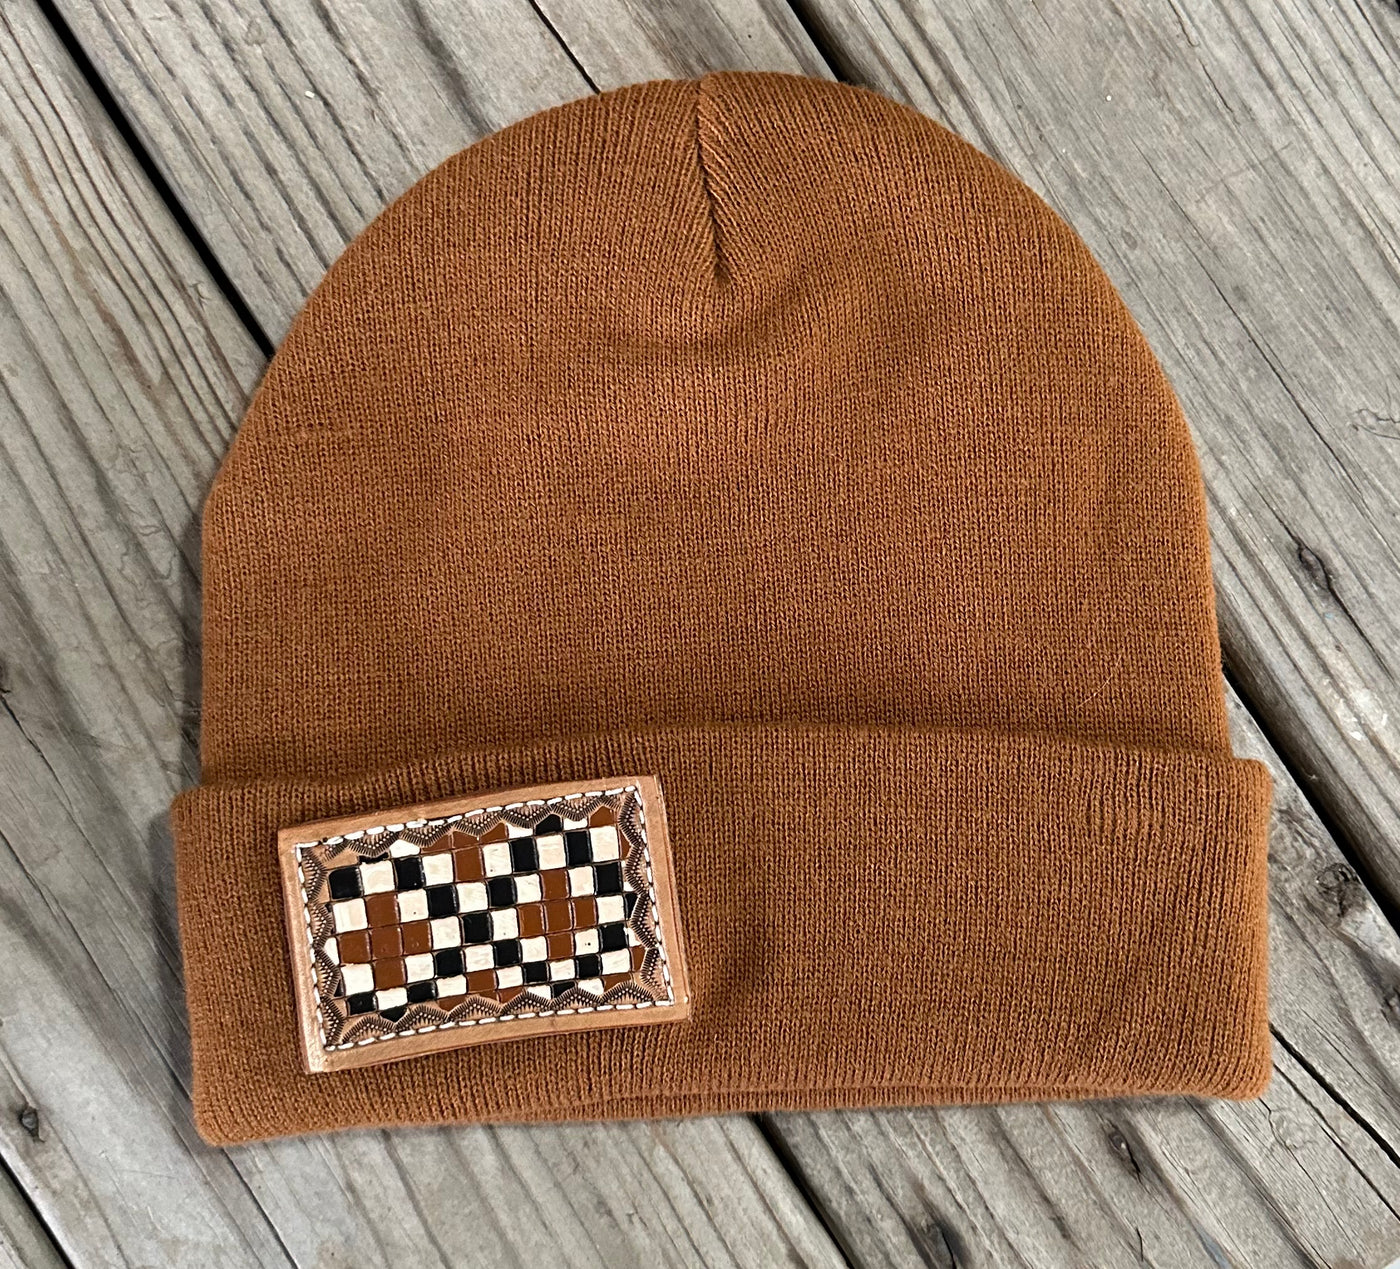 Tooled Leather Beanies